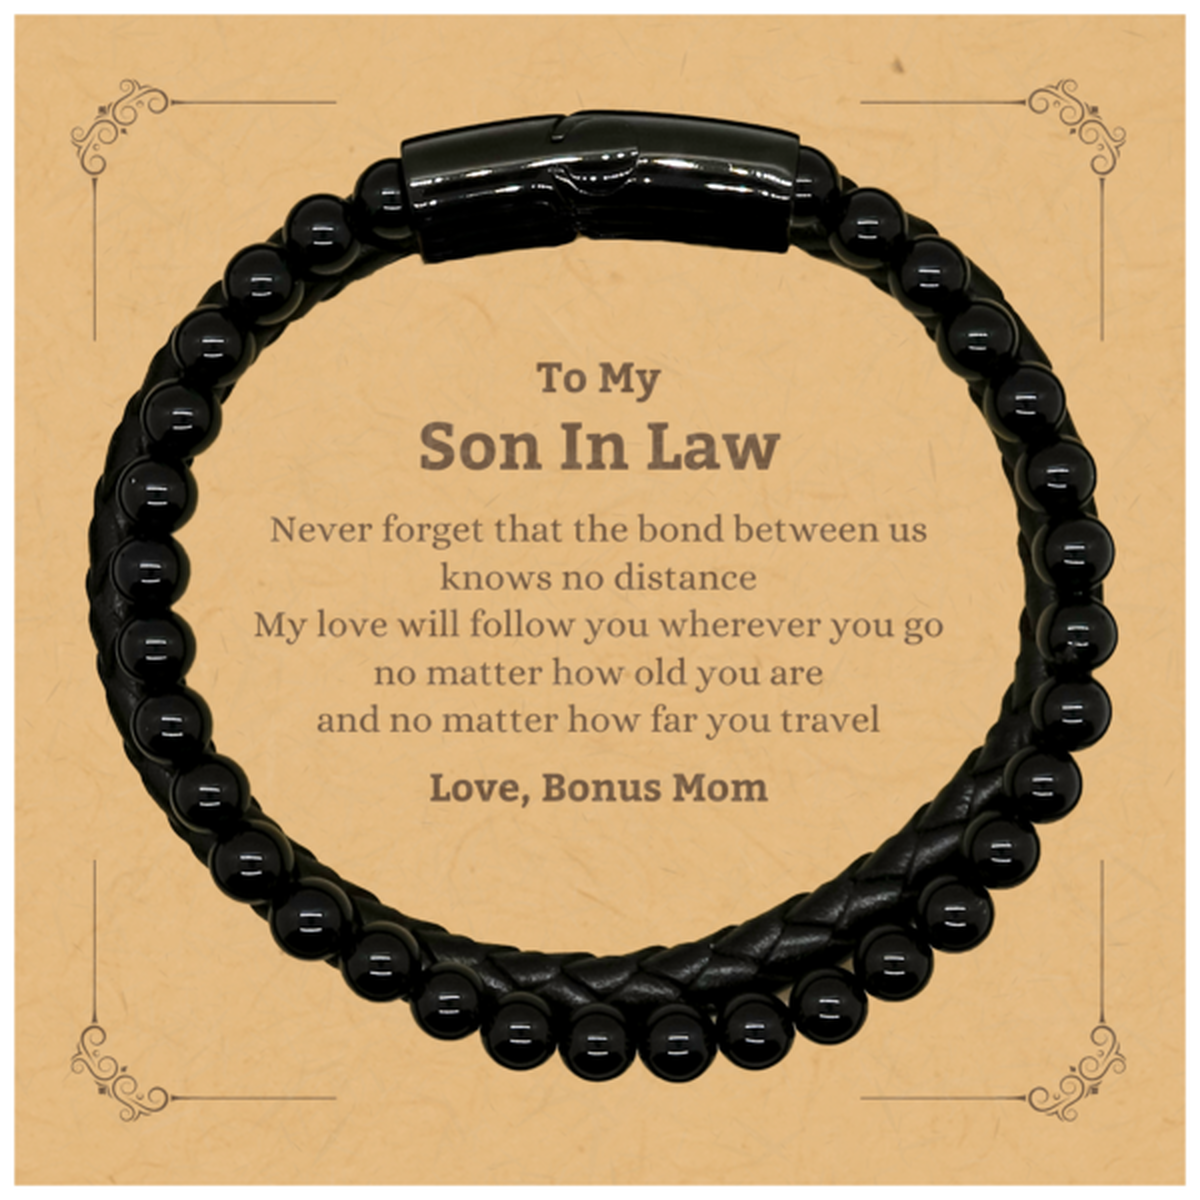 Son In Law Birthday Gifts from Bonus Mom, Adjustable Stone Leather Bracelets for Son In Law Christmas Graduation Unique Gifts Son In Law Never forget that the bond between us knows no distance. Love, Bonus Mom